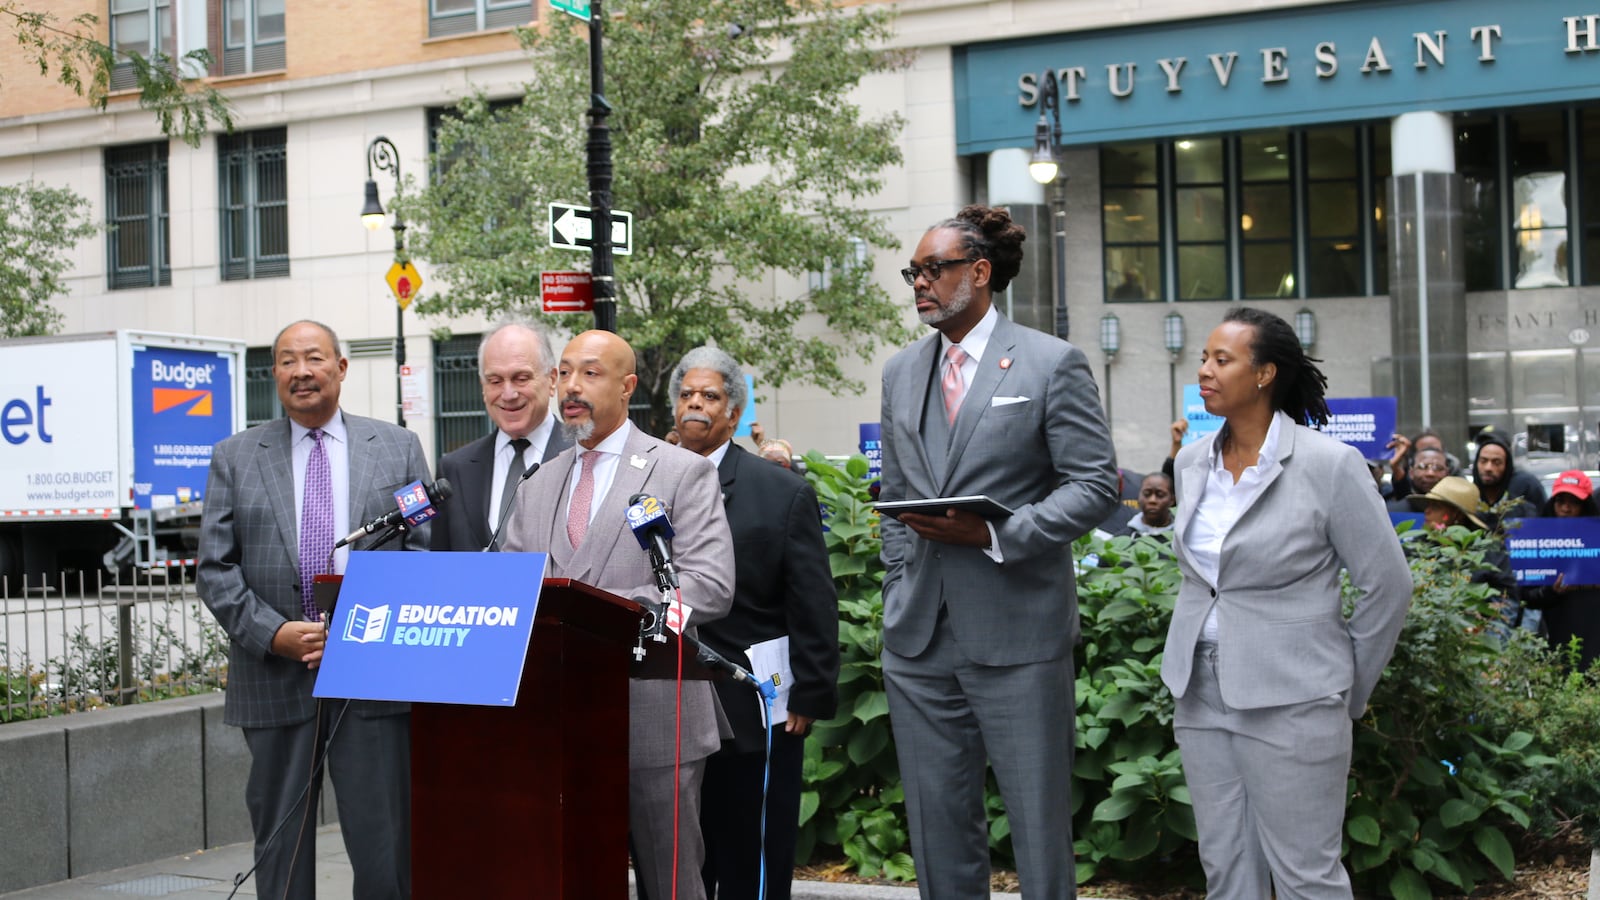 Supporters of Education Equity Campaign hold a press conference outside of Stuyvesant High School, including Rev. Kirsten Foy, center, cosmetics billionaire Ronald Lauder, left, and former Time Warner and Citigroup chairman Richard Parsons, far left.